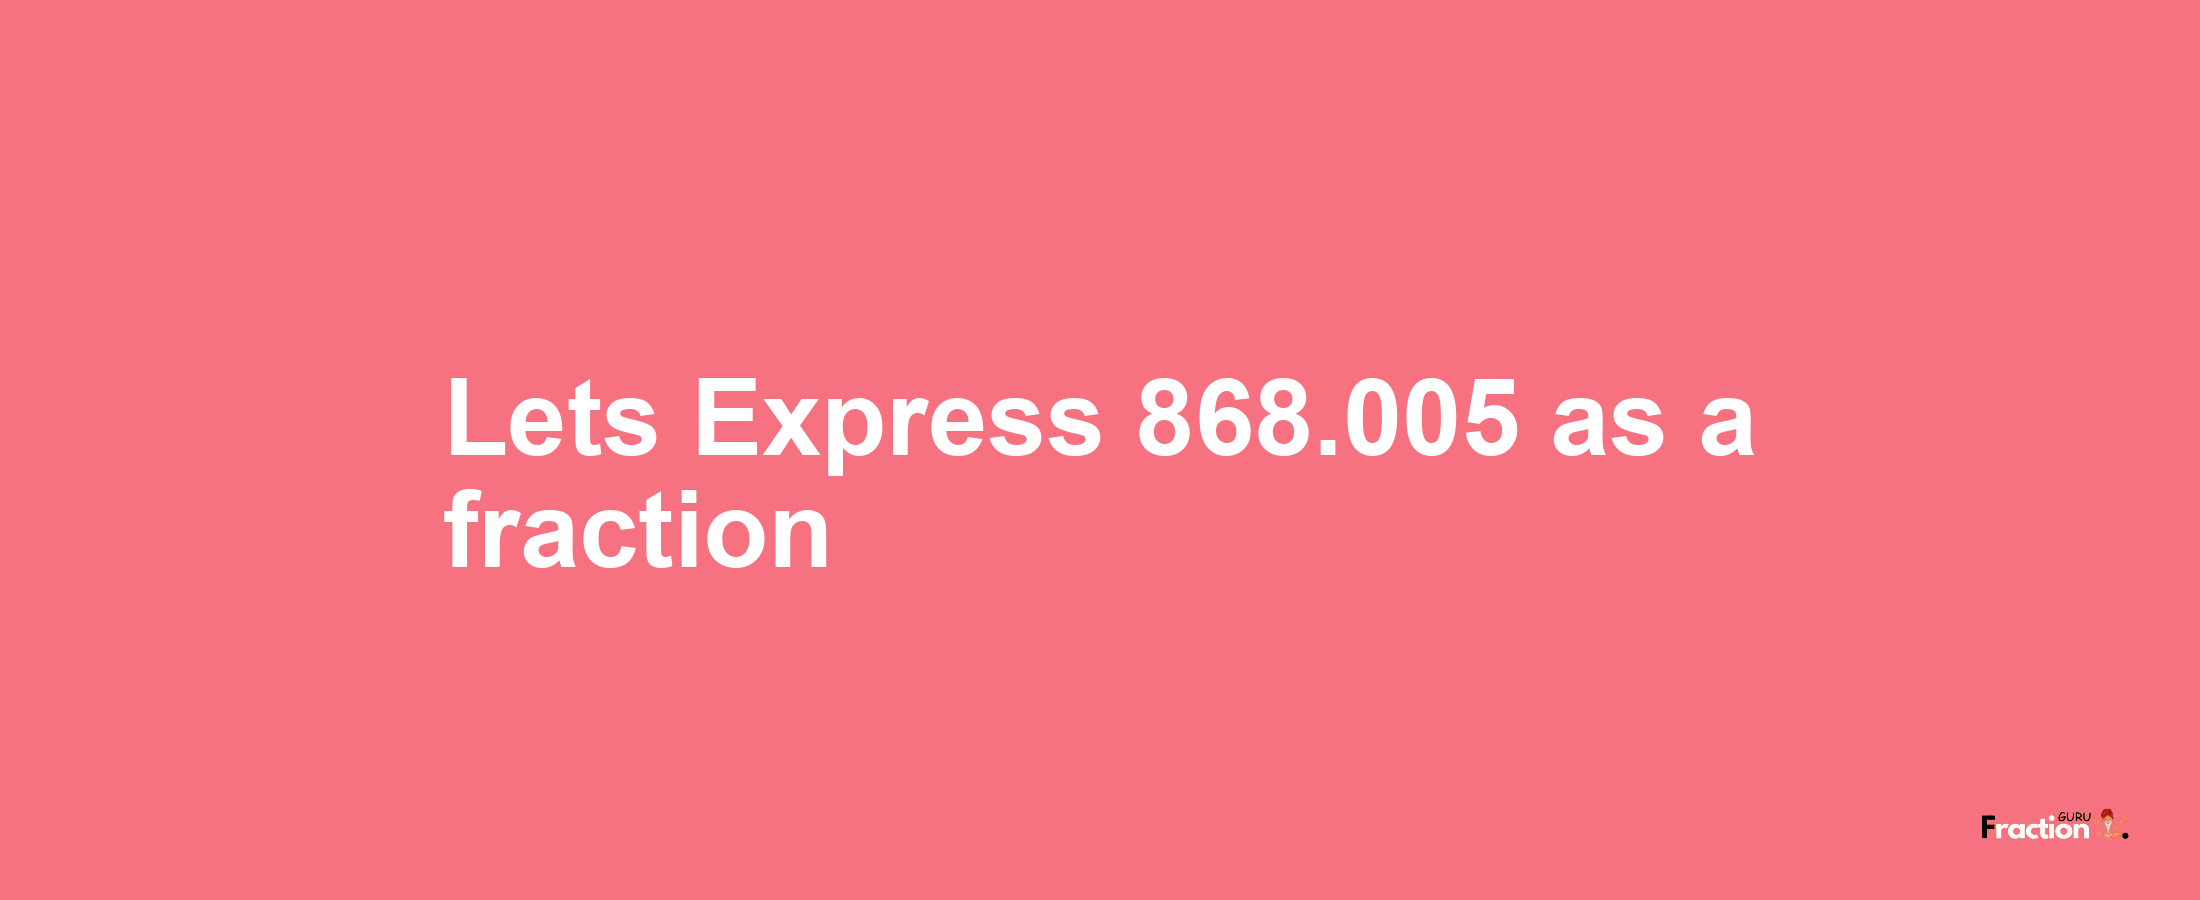 Lets Express 868.005 as afraction